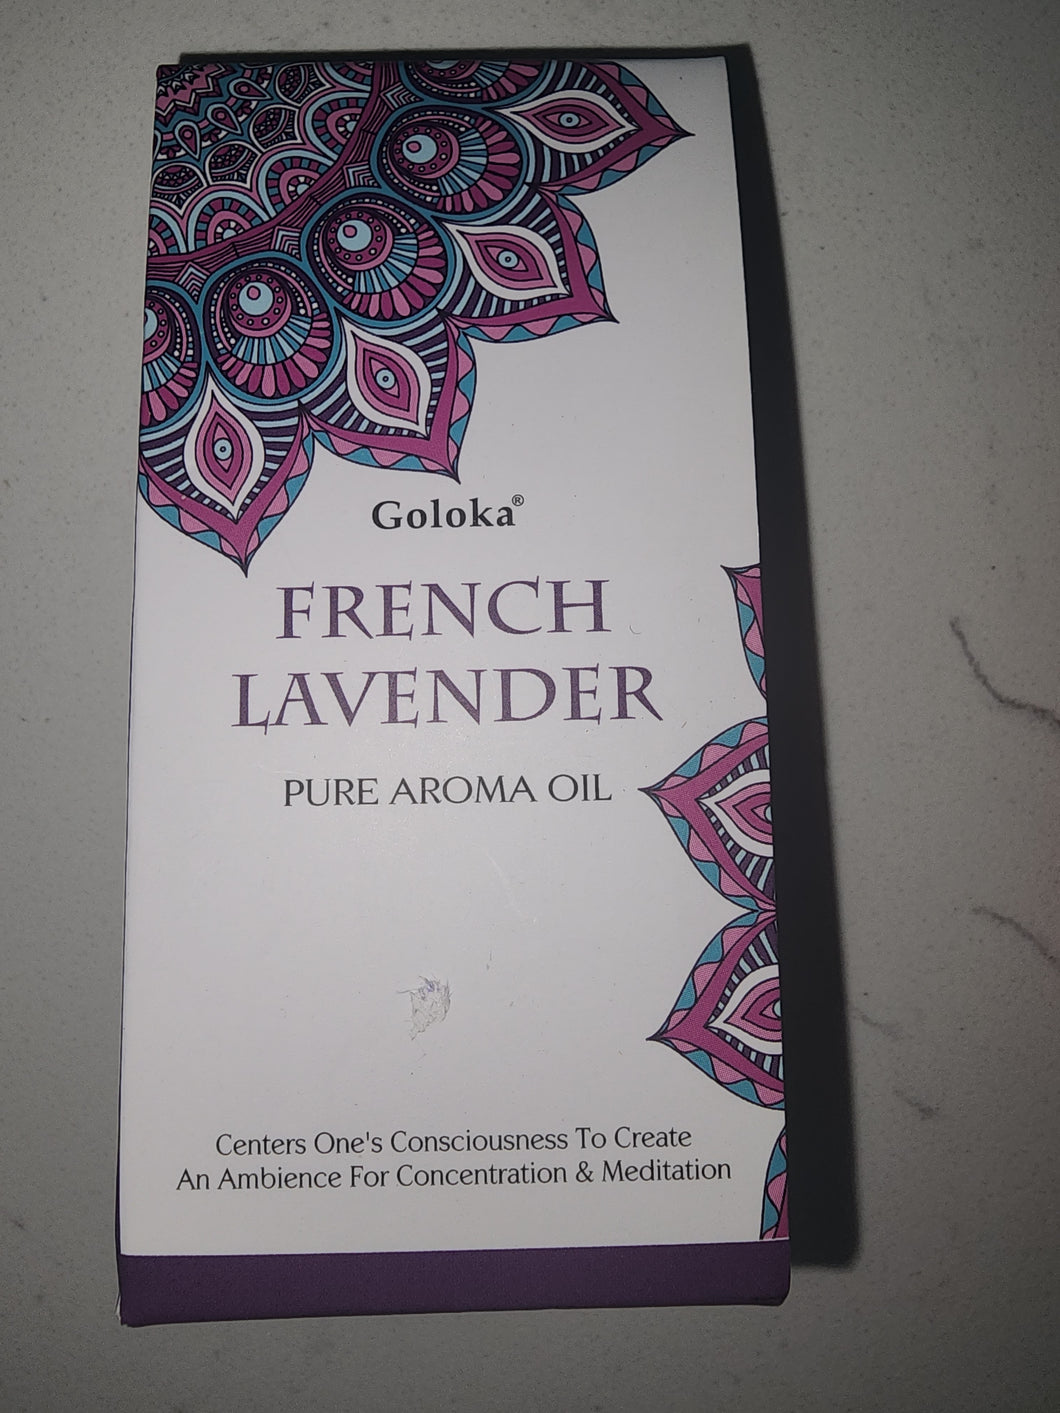 French Lavender Goloka Pure Aroma Oil